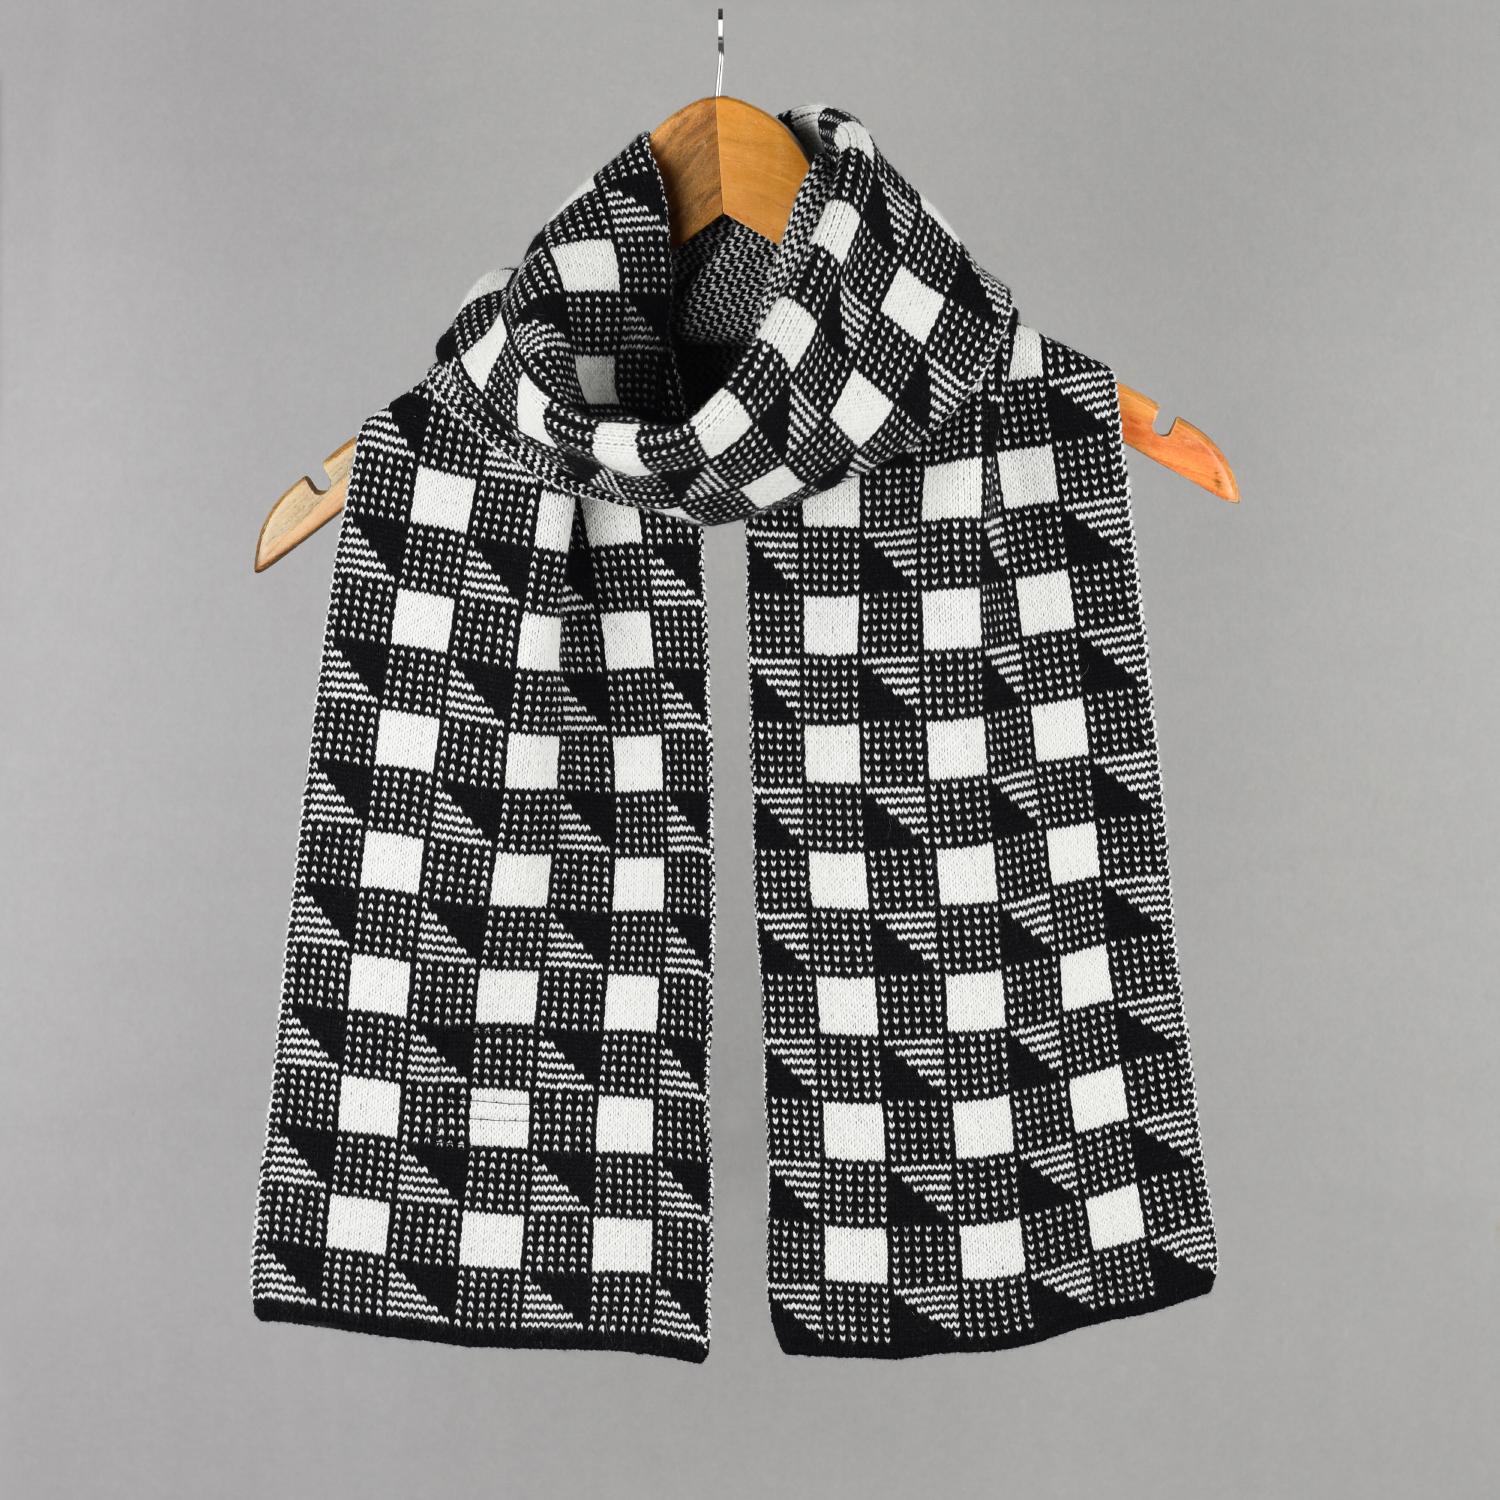 thepatternguild_knitted_scarf_cubes_black_white1.jpg